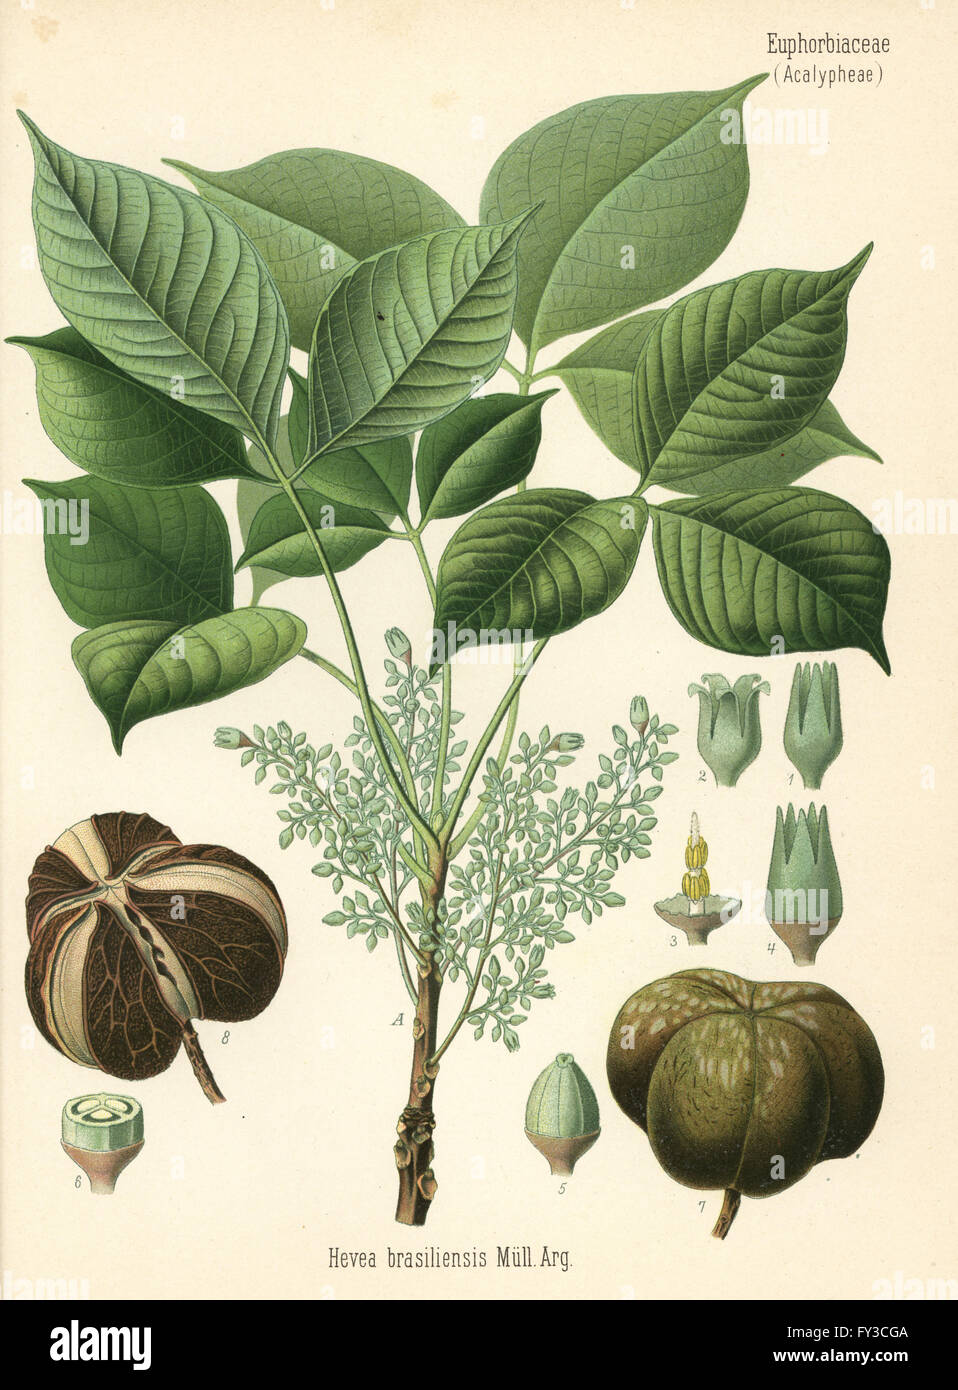 Para rubber tree or sharinga tree, Hevea brasiliensis. Chromolithograph after a botanical illustration from Hermann Adolph Koehler's Medicinal Plants, edited by Gustav Pabst, Koehler, Germany, 1887. Stock Photo